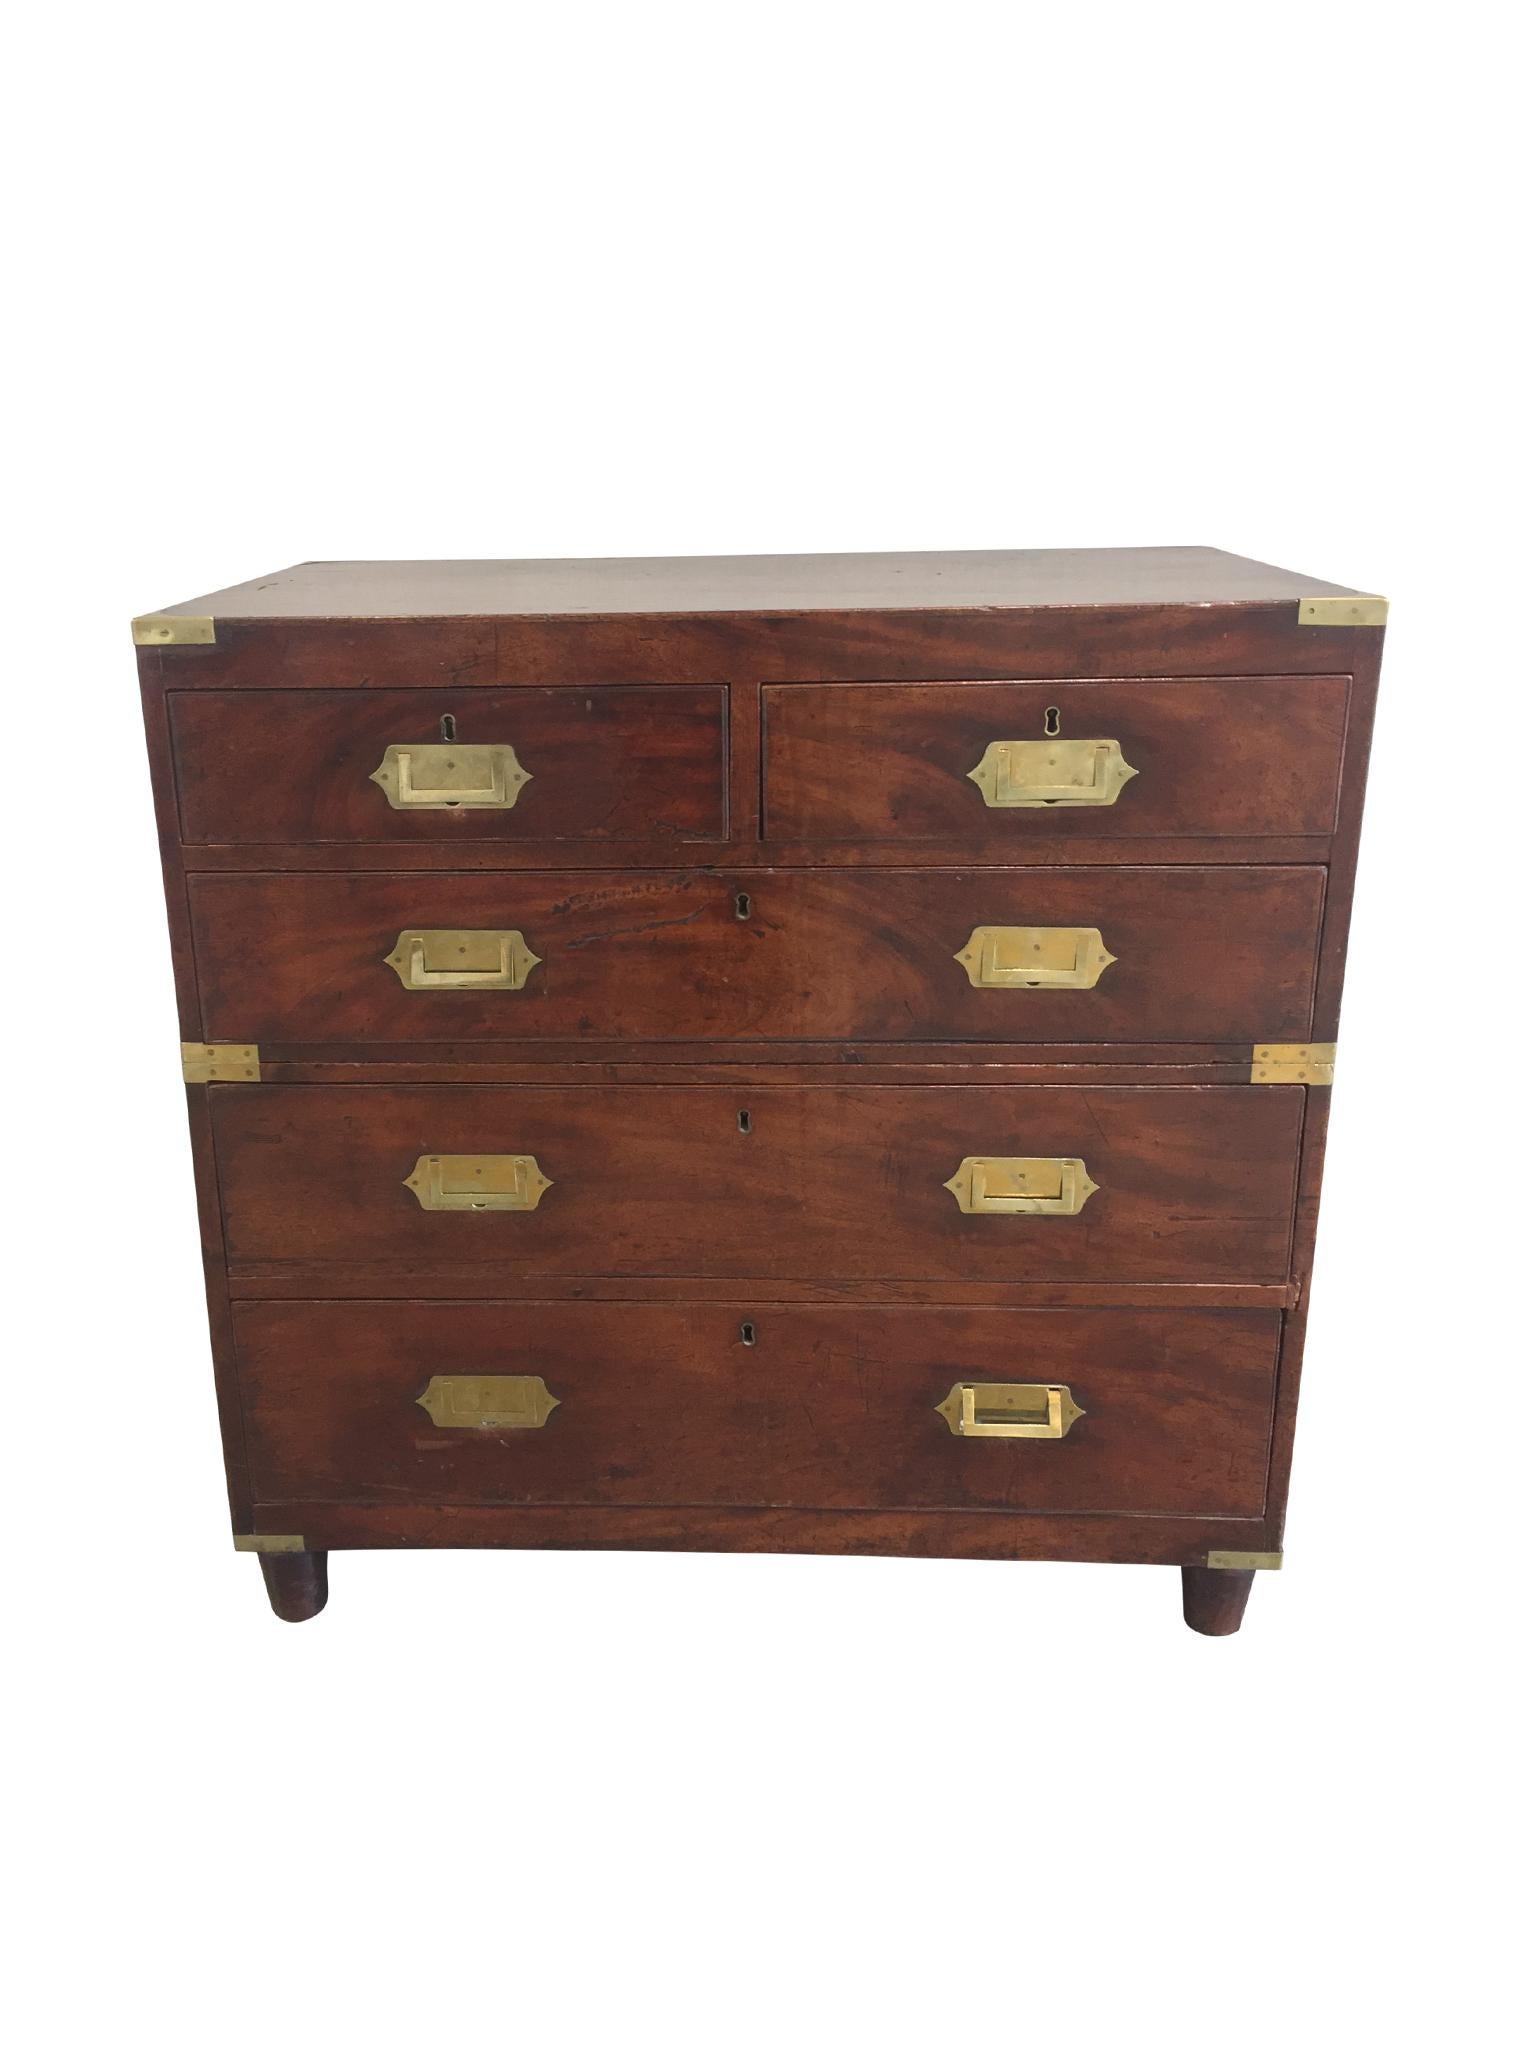 An antique English campaign chest of drawers, 19th century. This well-aged chest consists of two case pieces that elegantly stack and lock together. The wood is a honey-brown mahogany hue with visible dents and scratches that have rounded over the